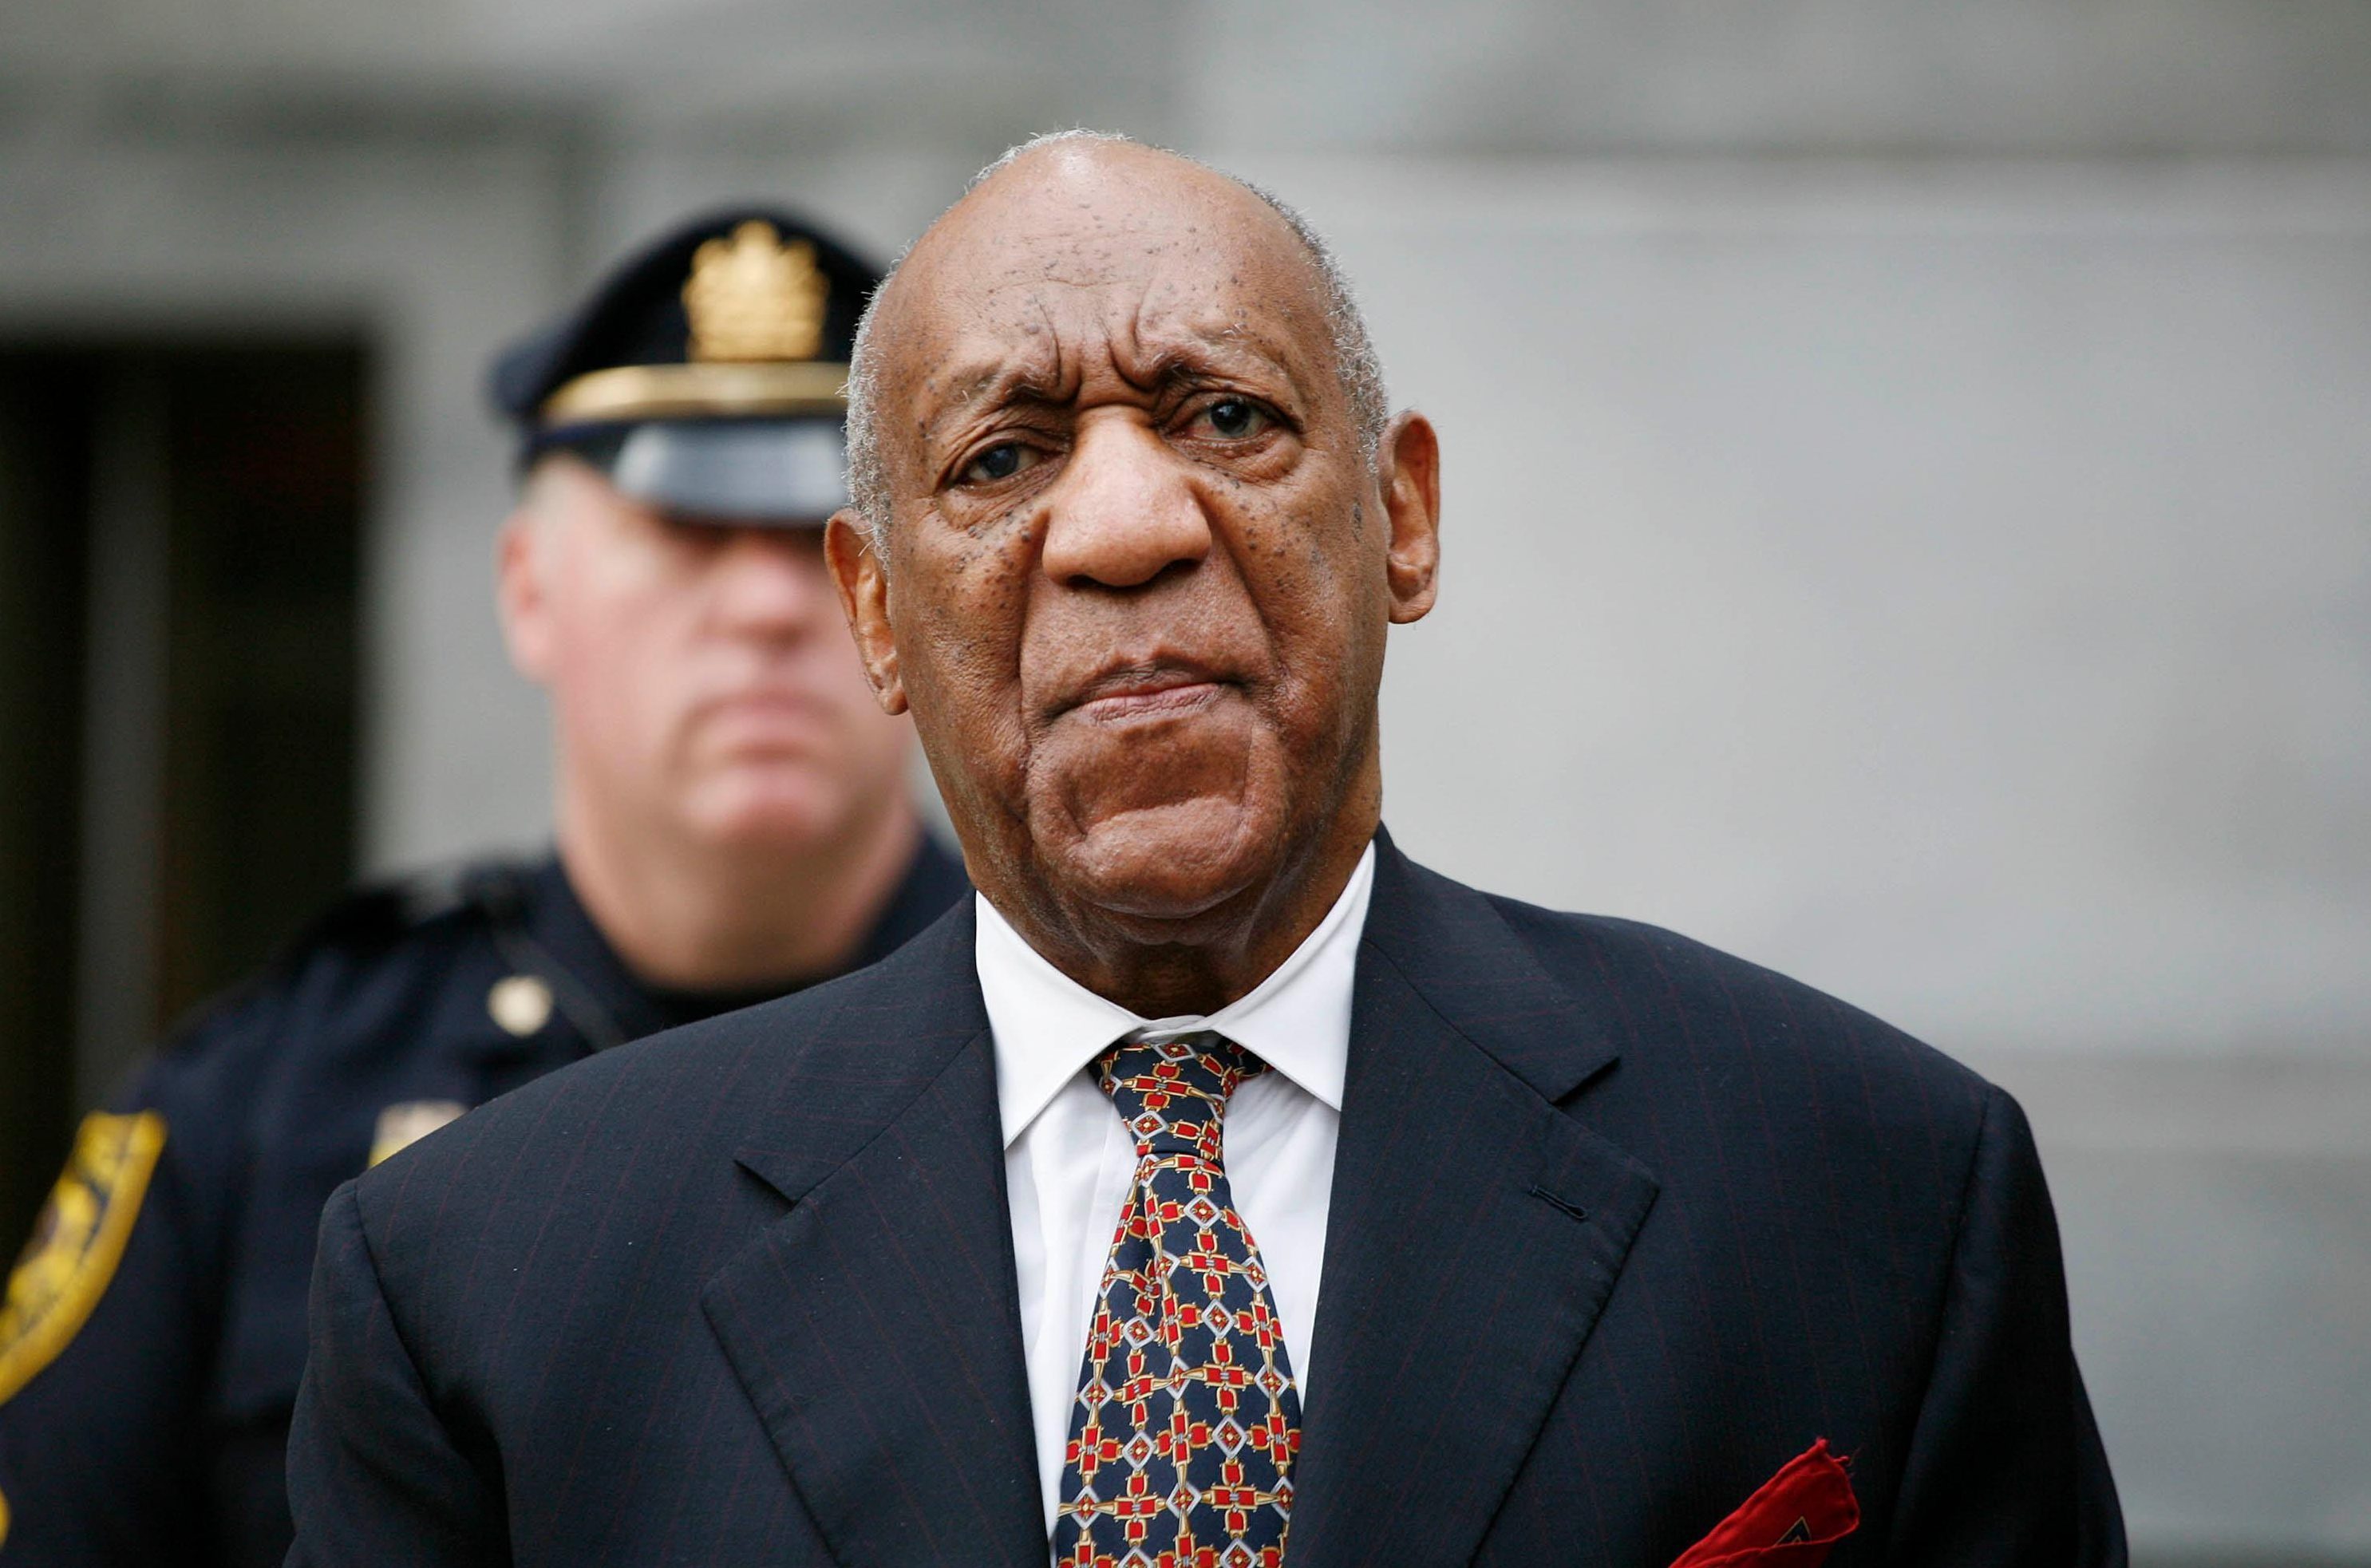 Bill Cosby’s Lawyers Requesting His Release From Prison Over Coronavirus Concerns